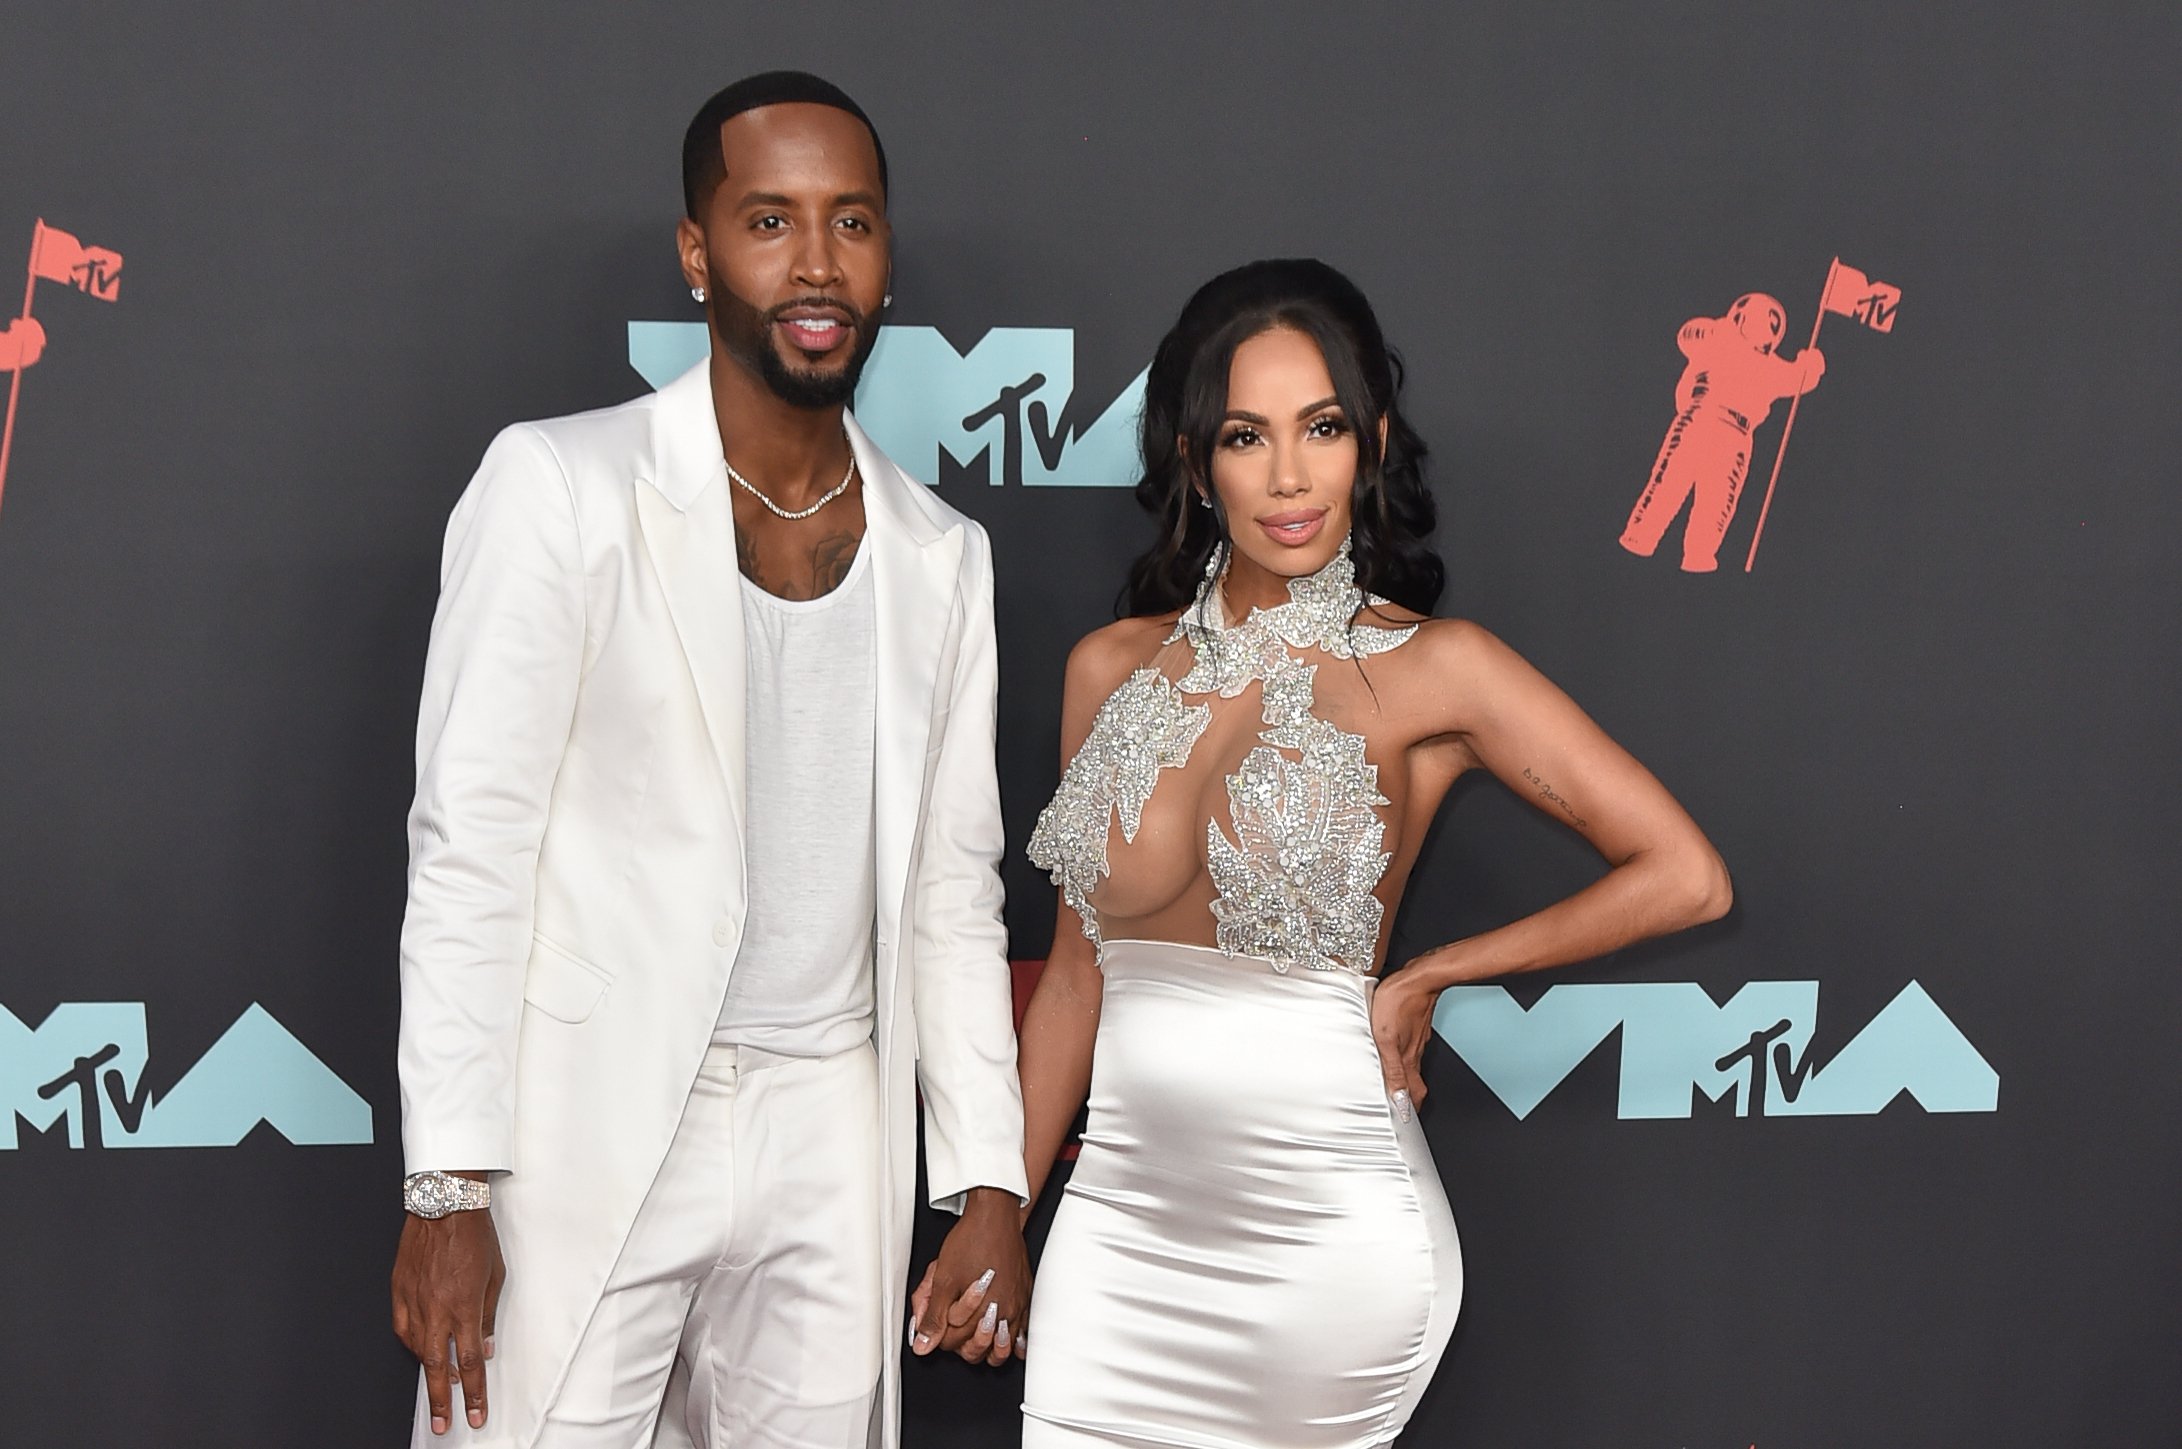 Safaree Samuels and Erica Mena Samuels at the 2019 MTV VMAs red carpet at Prudential Center on August 26, 2019 in Newark, New Jersey.| Source: Getty Images